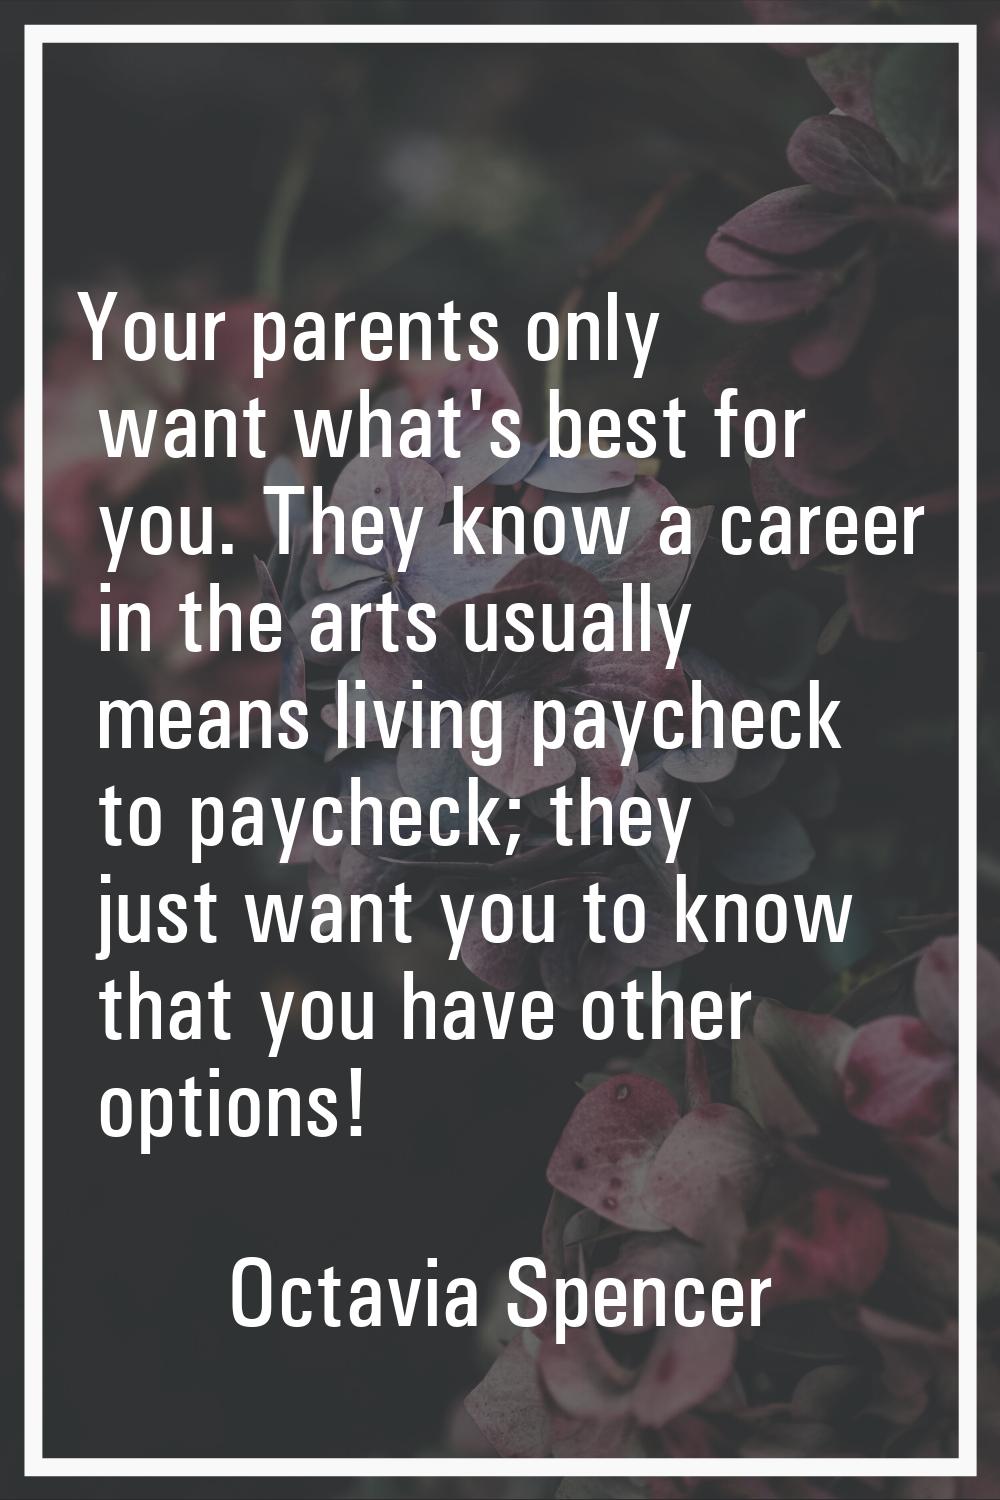 Your parents only want what's best for you. They know a career in the arts usually means living pay